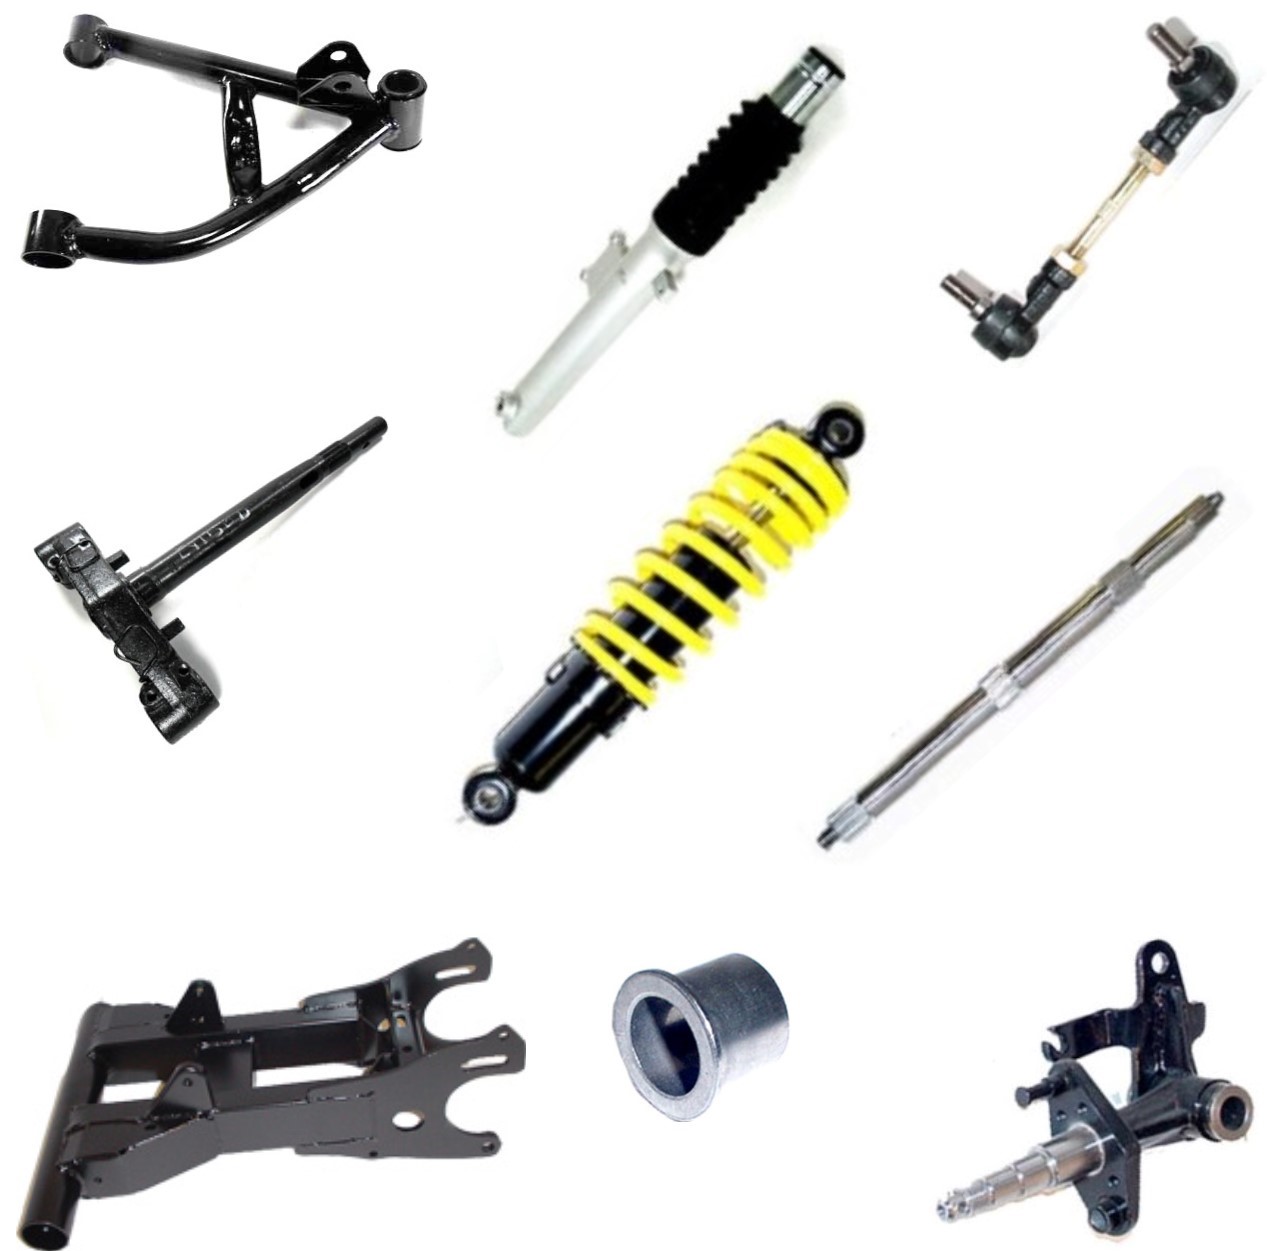 Suspension, Shocks, Forks Axles, A-Arms,Tie Rods, etc.